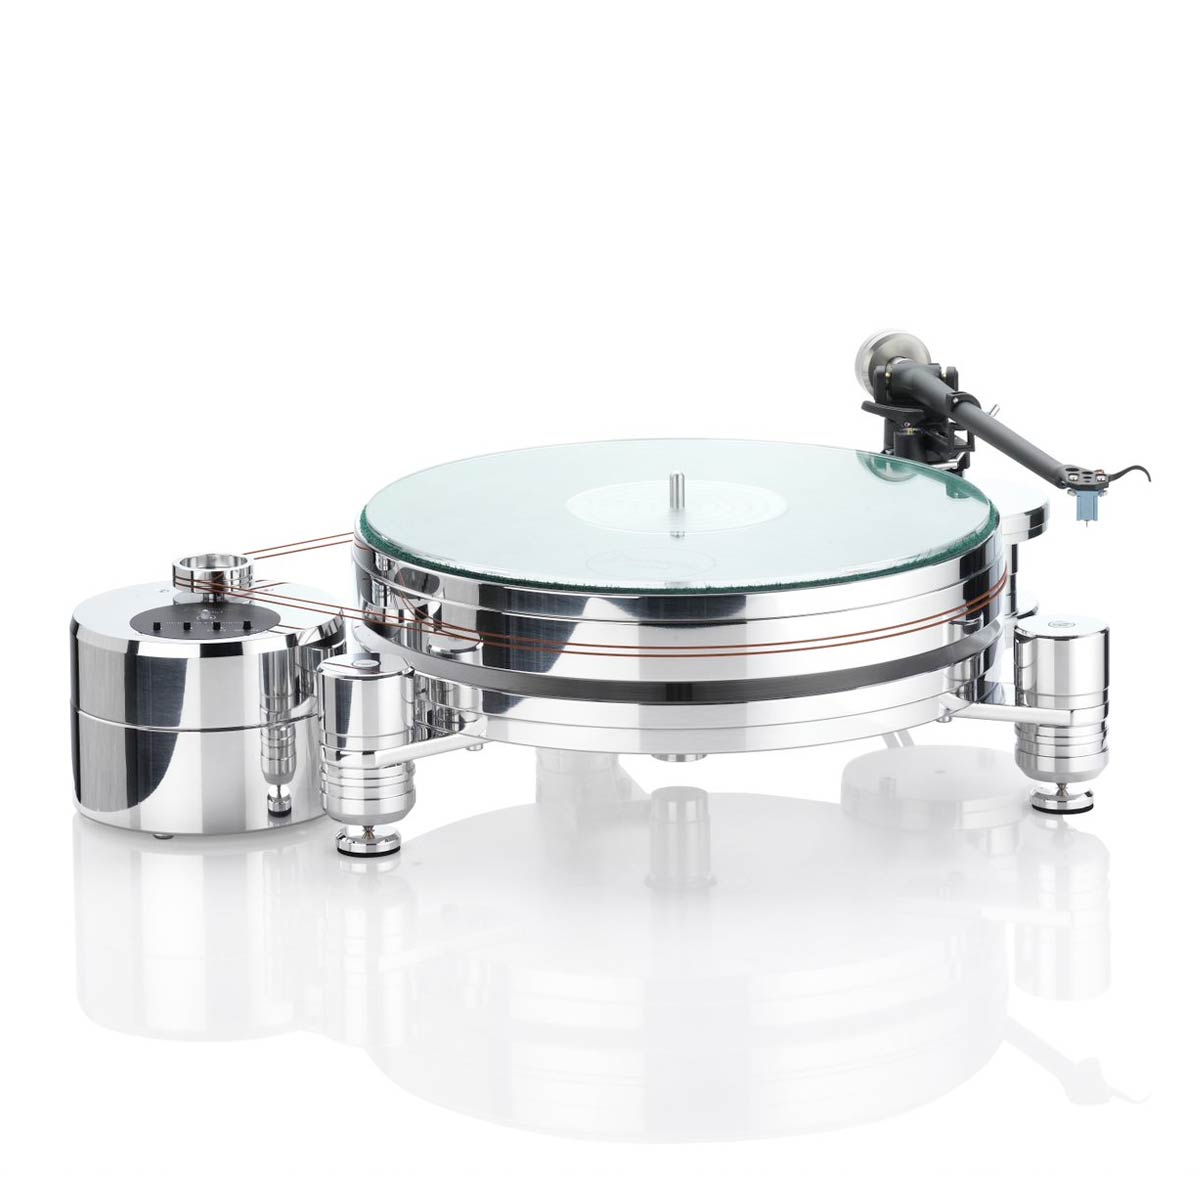 Acoustic Solid 311 Metal Precision Turntable